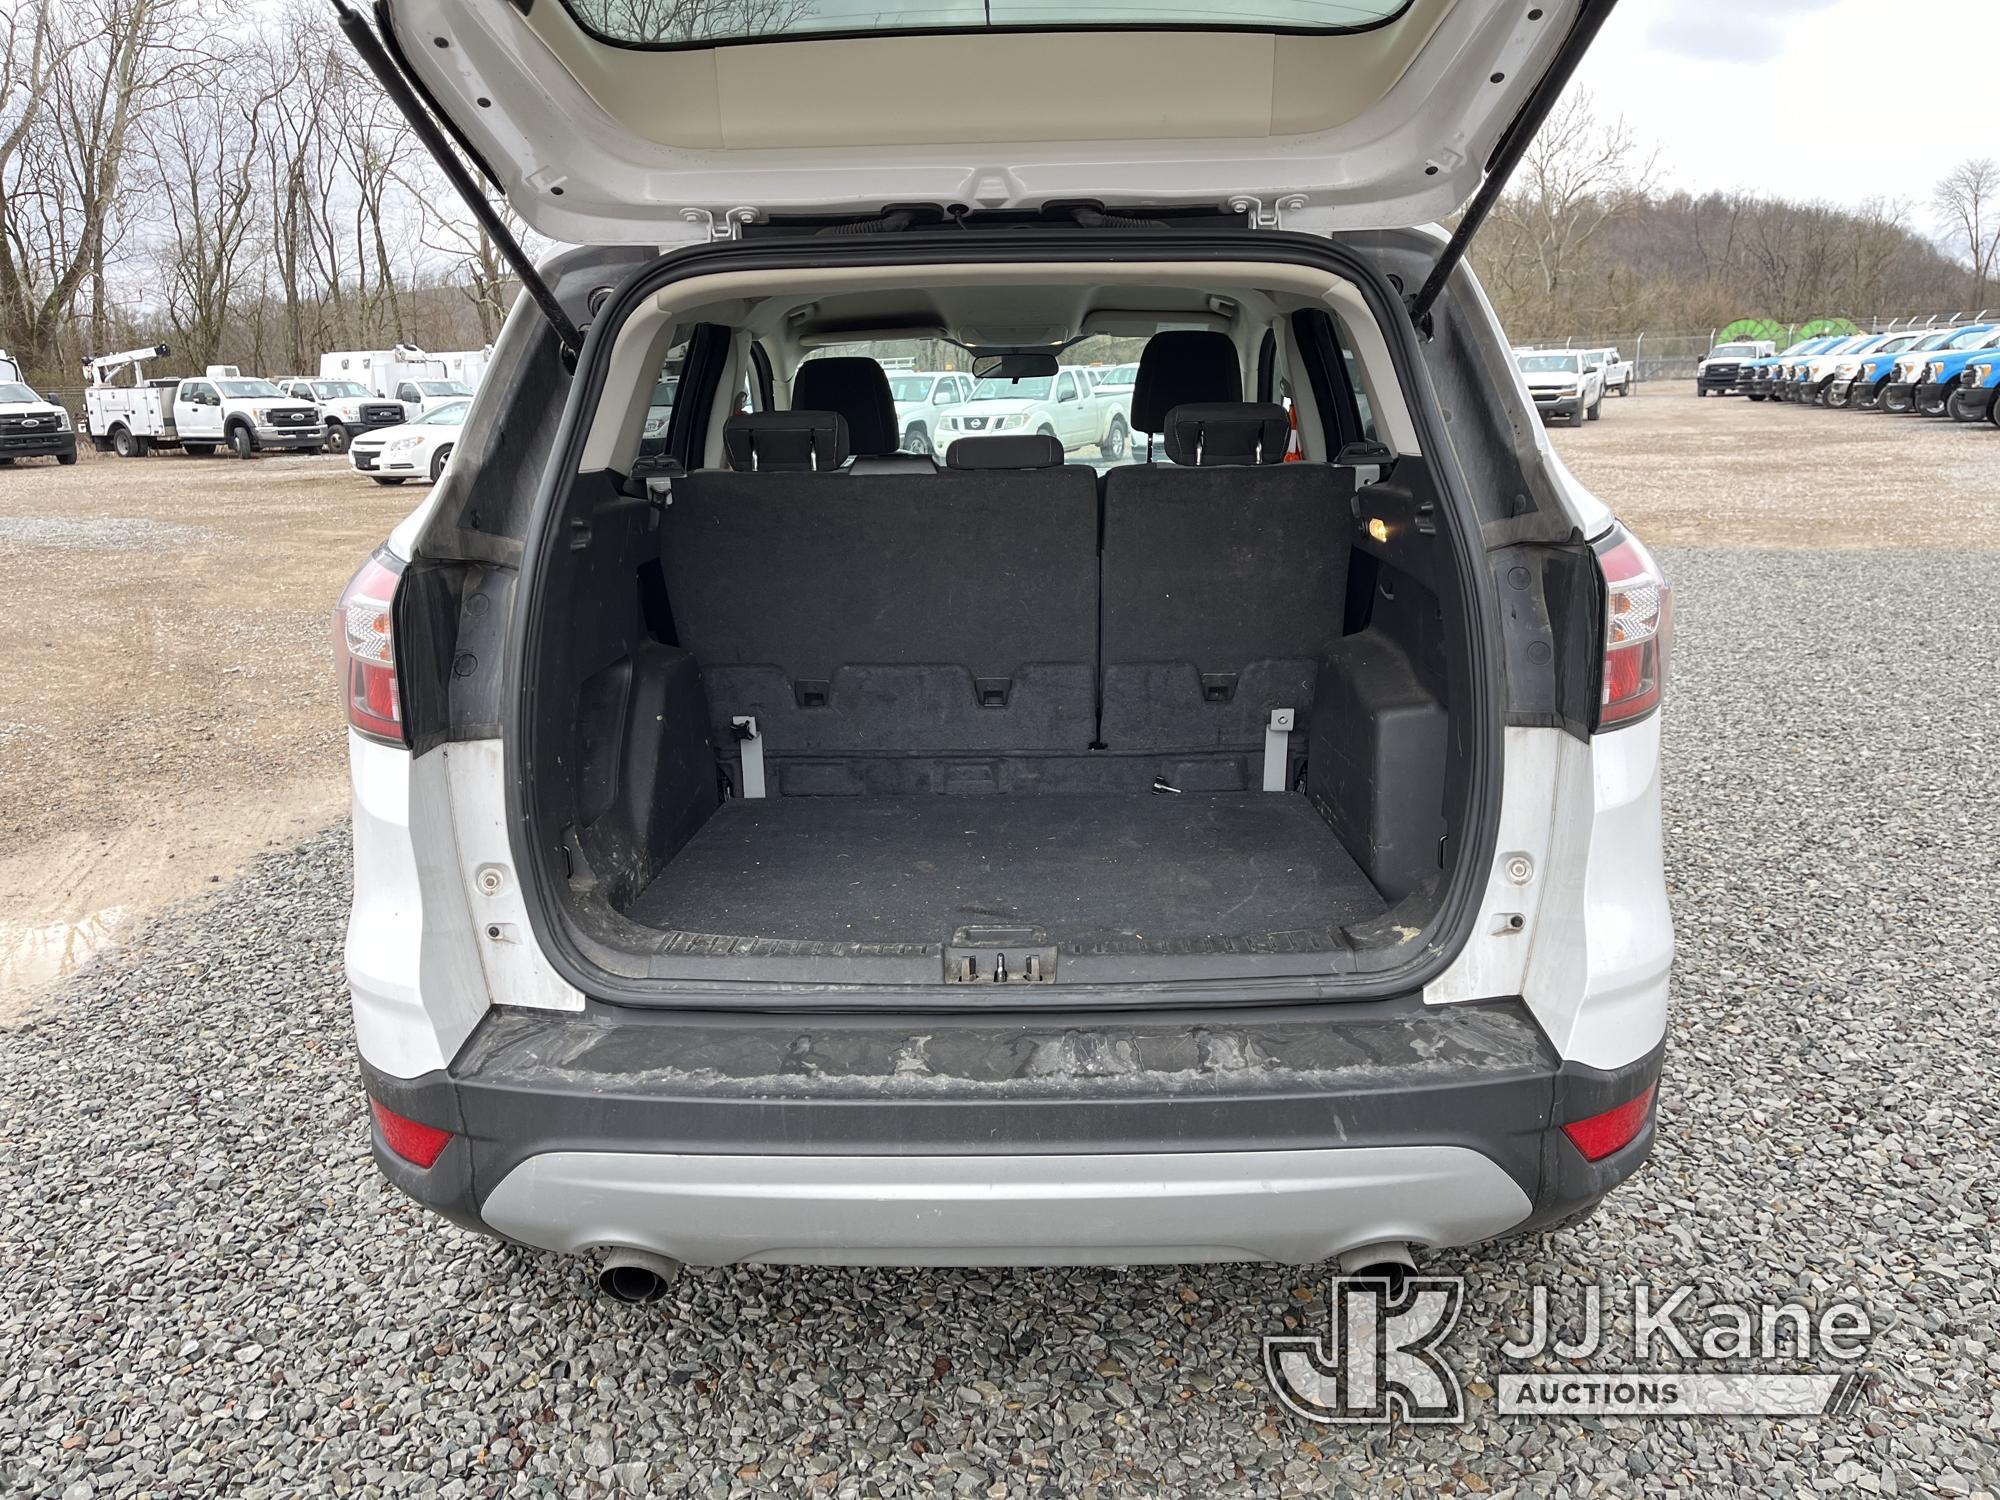 (Smock, PA) 2017 Ford Escape 4x4 4-Door Sport Utility Vehicle Runs & Moves, Rust Damage